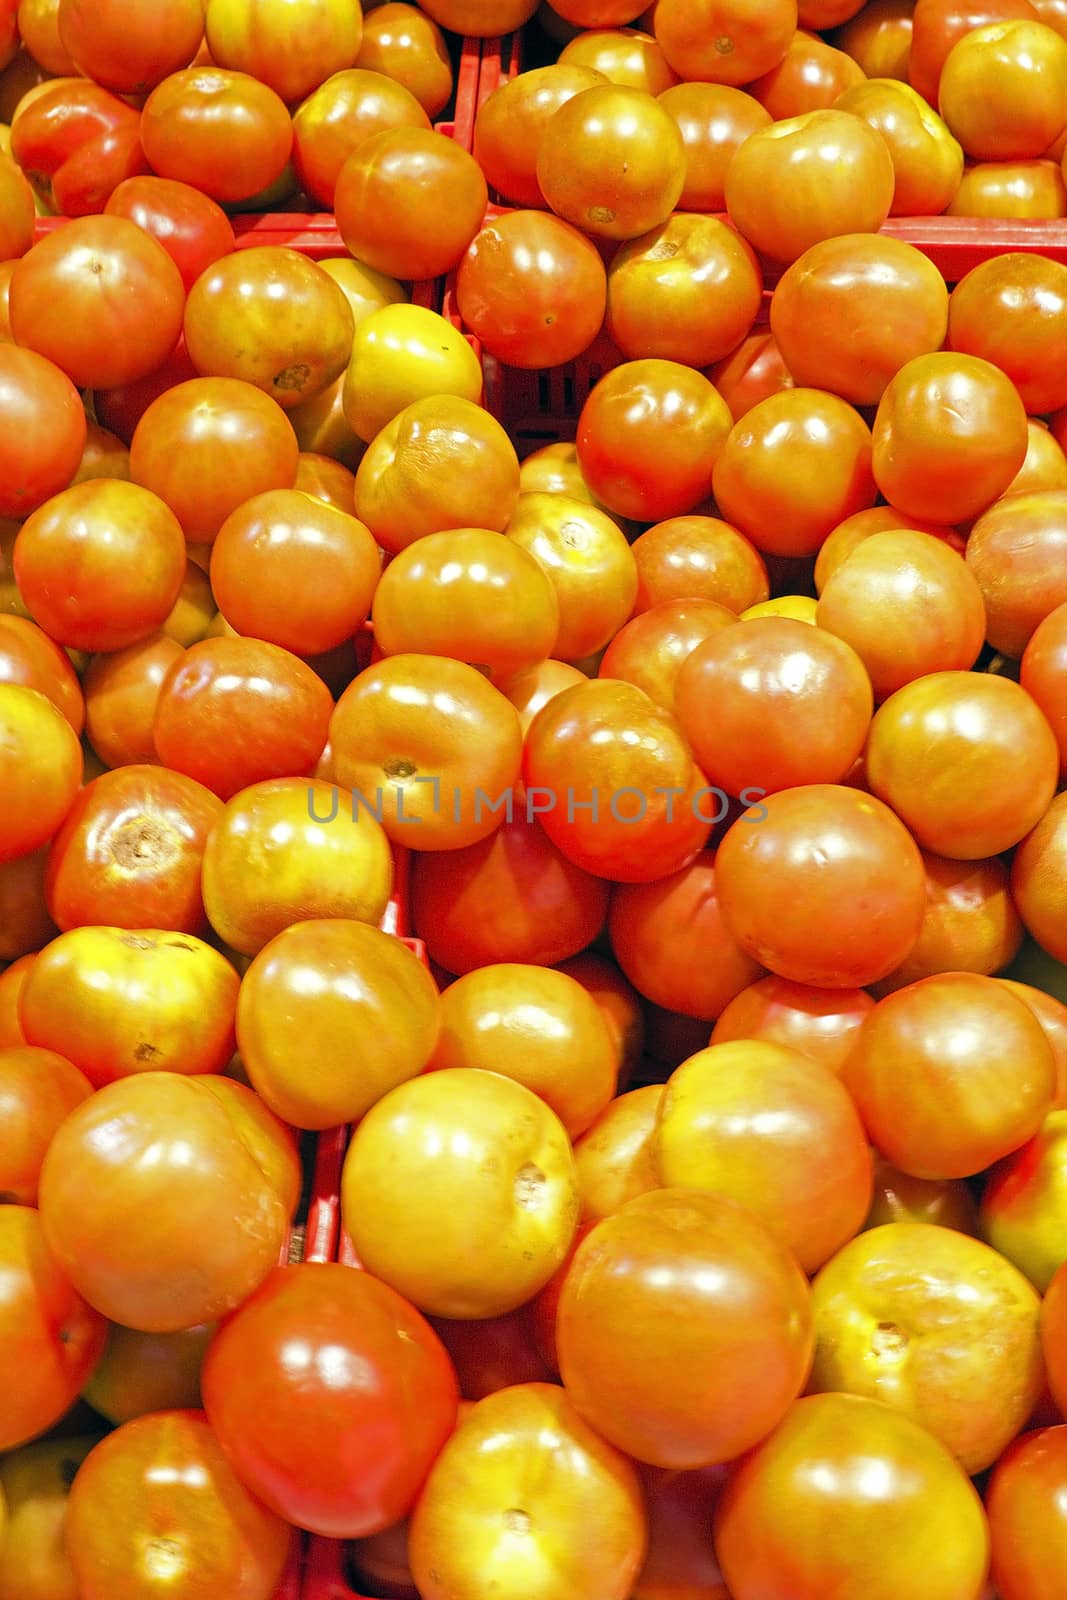 Tomatoes in the supermarket by devy